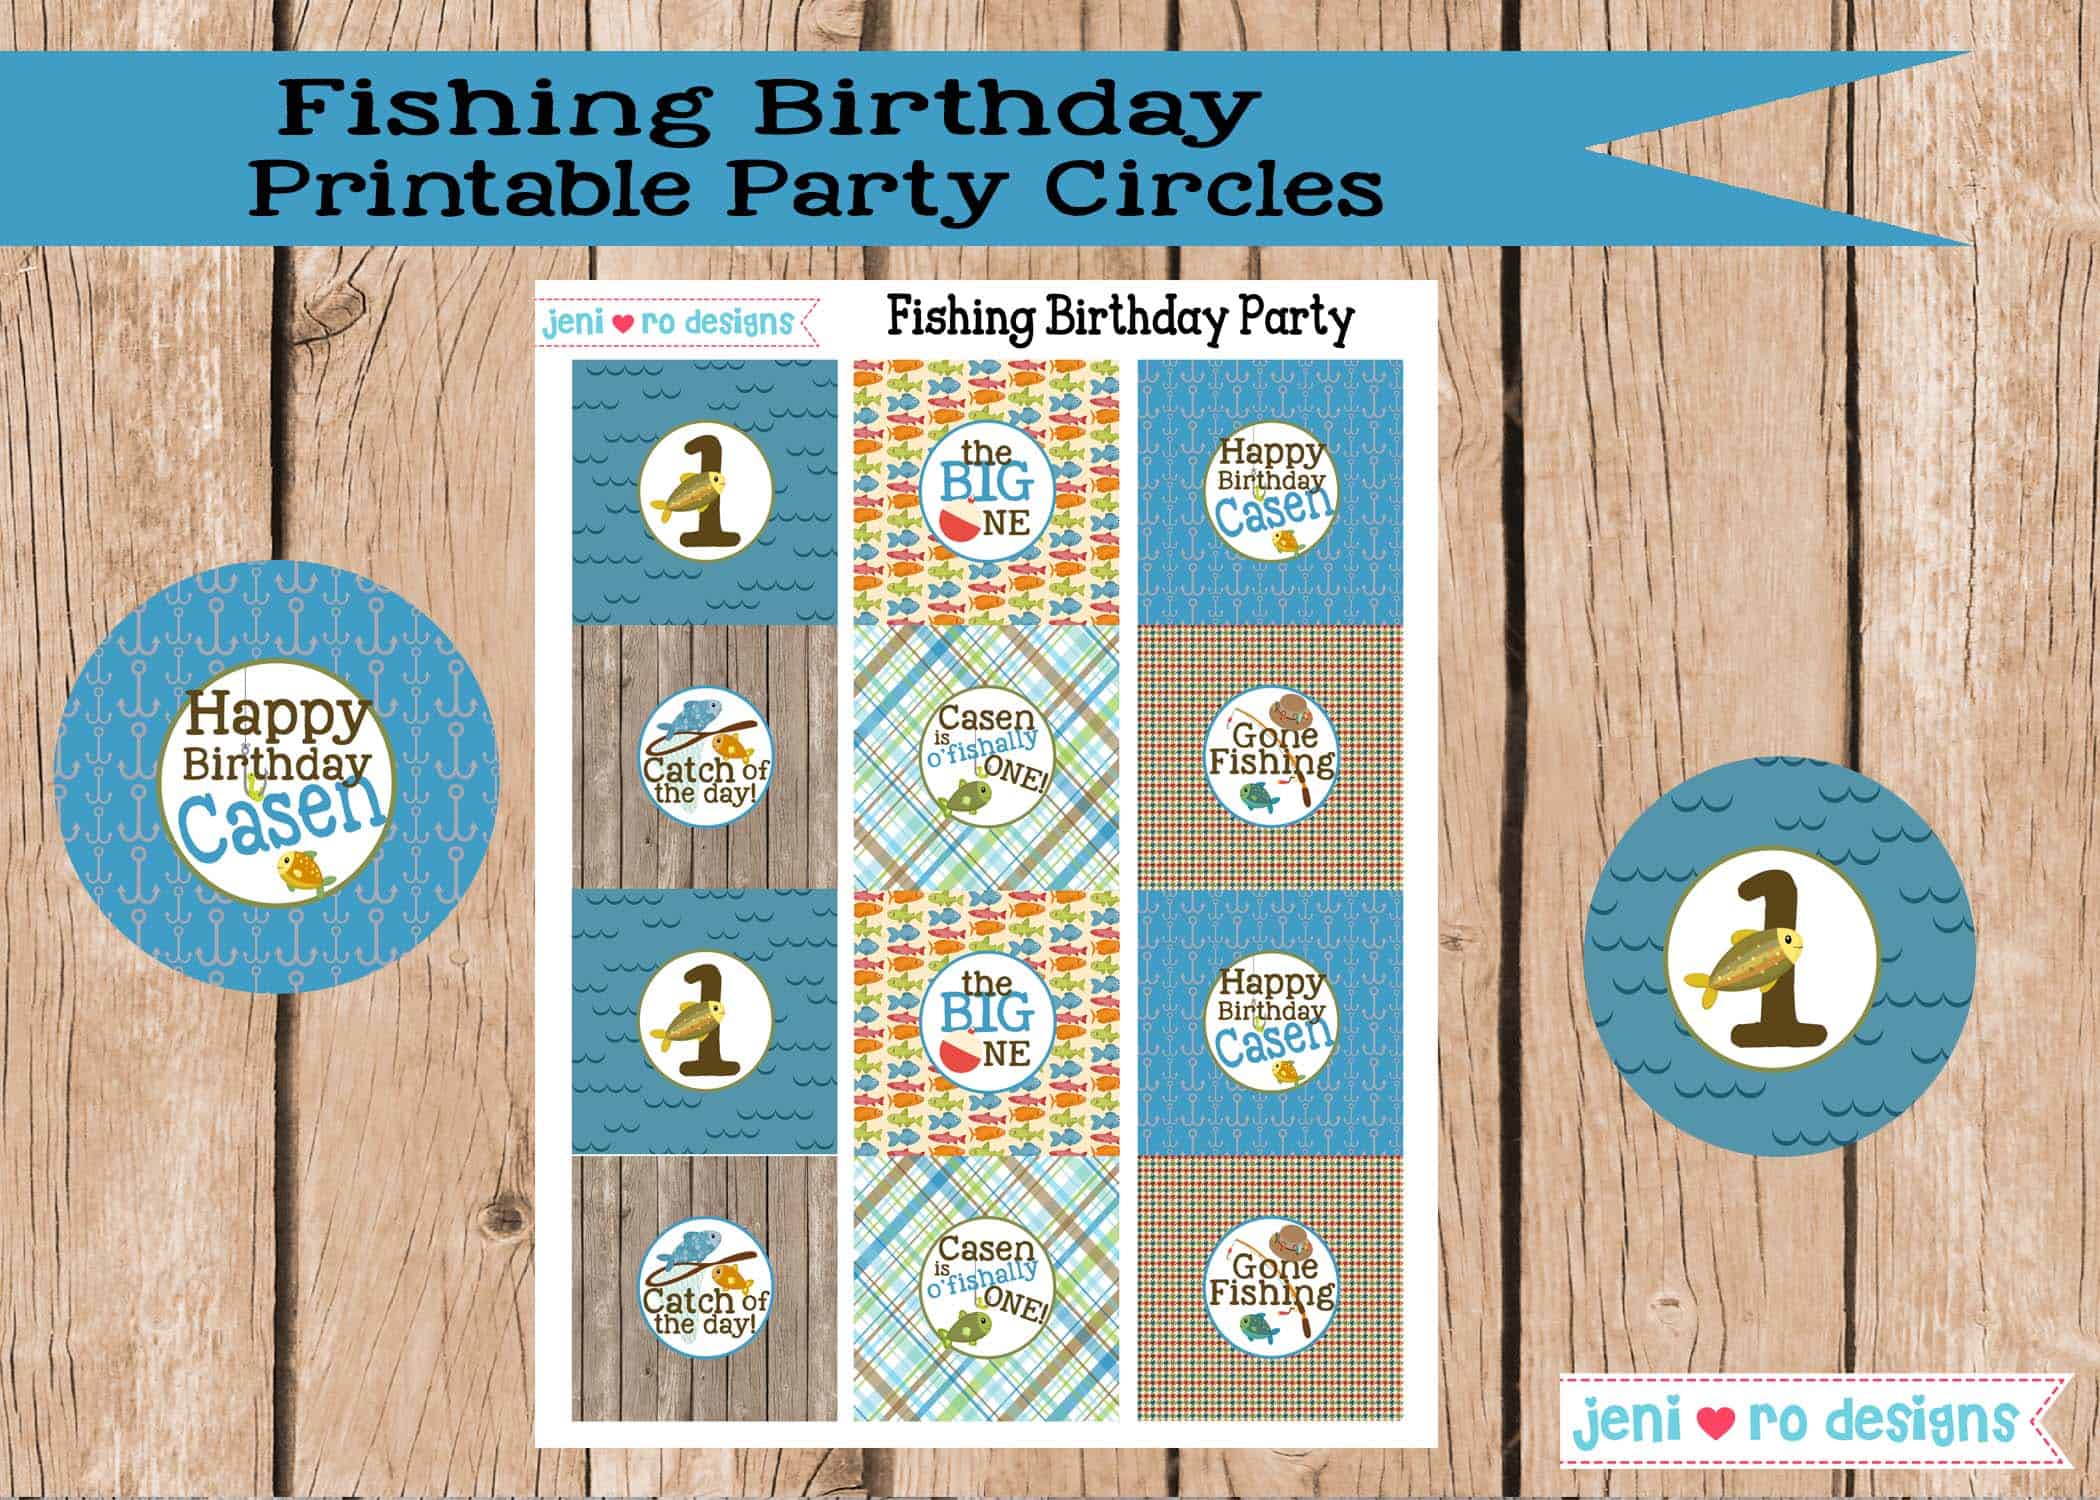 GONE FISHING Banner personalized Banner Fishing 1st Birthday the